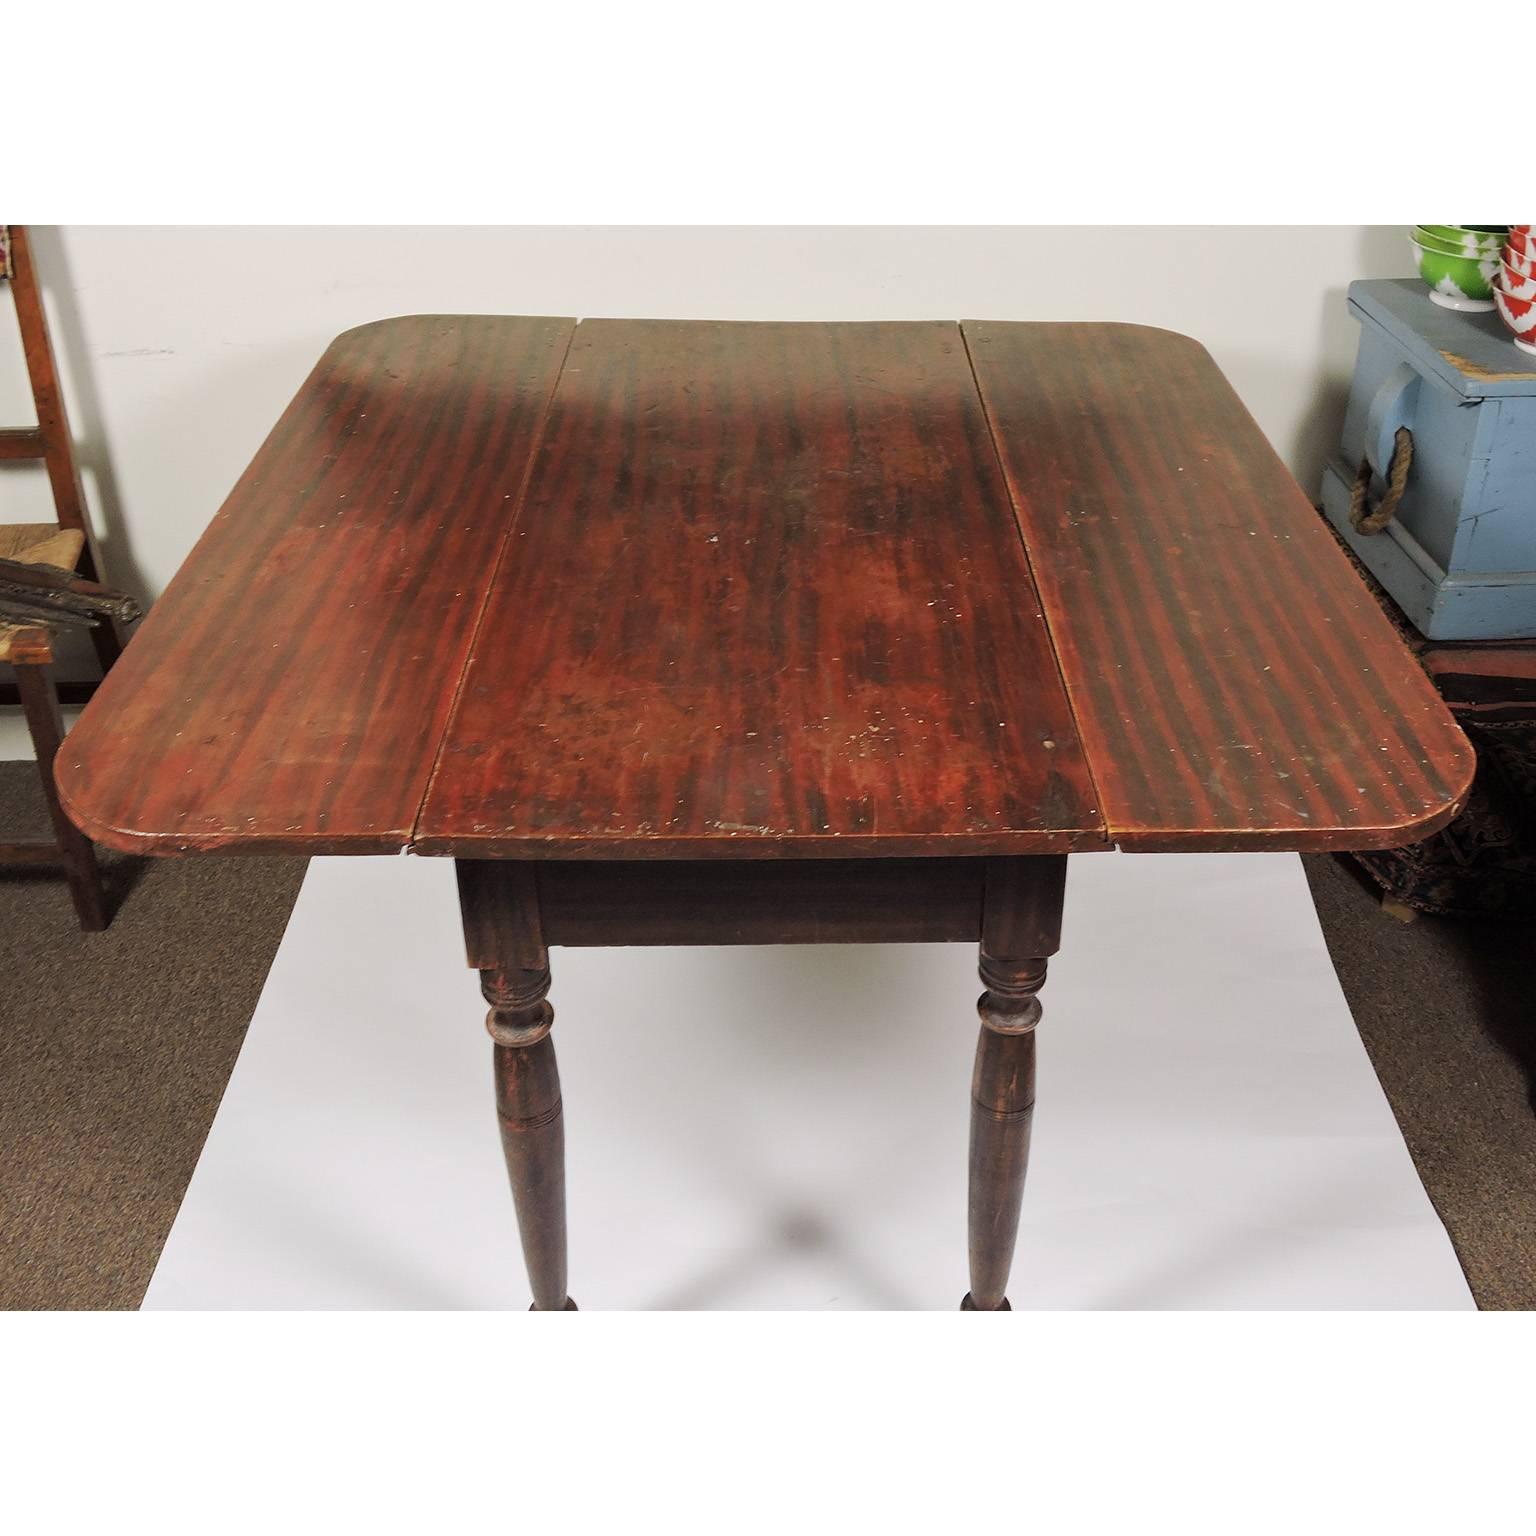 American country Sheraton grain painted drop-leaf table, with red ground and black grain decoration; swing out supports and turned legs. From Maine.
Dimensions: 29 1/4 x 41 3/4 x 20 1/4 inches (open: 40 5/8 inches).

 